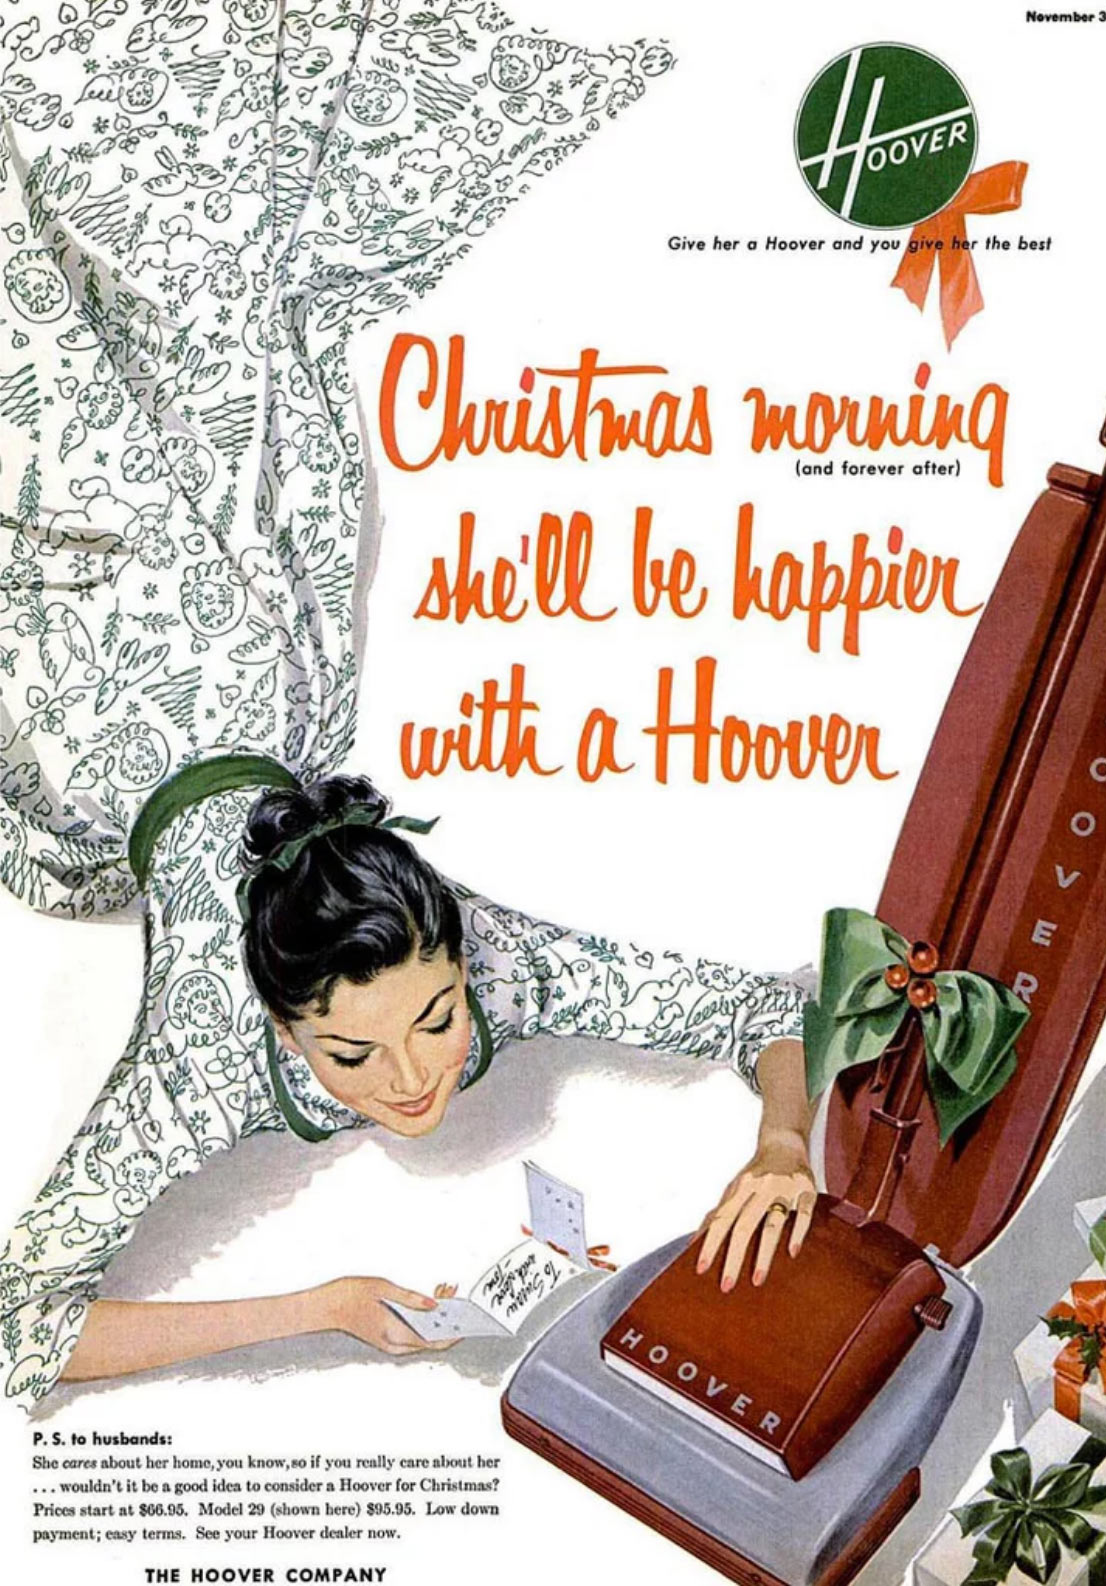 happier-with-a-hoover.jpg